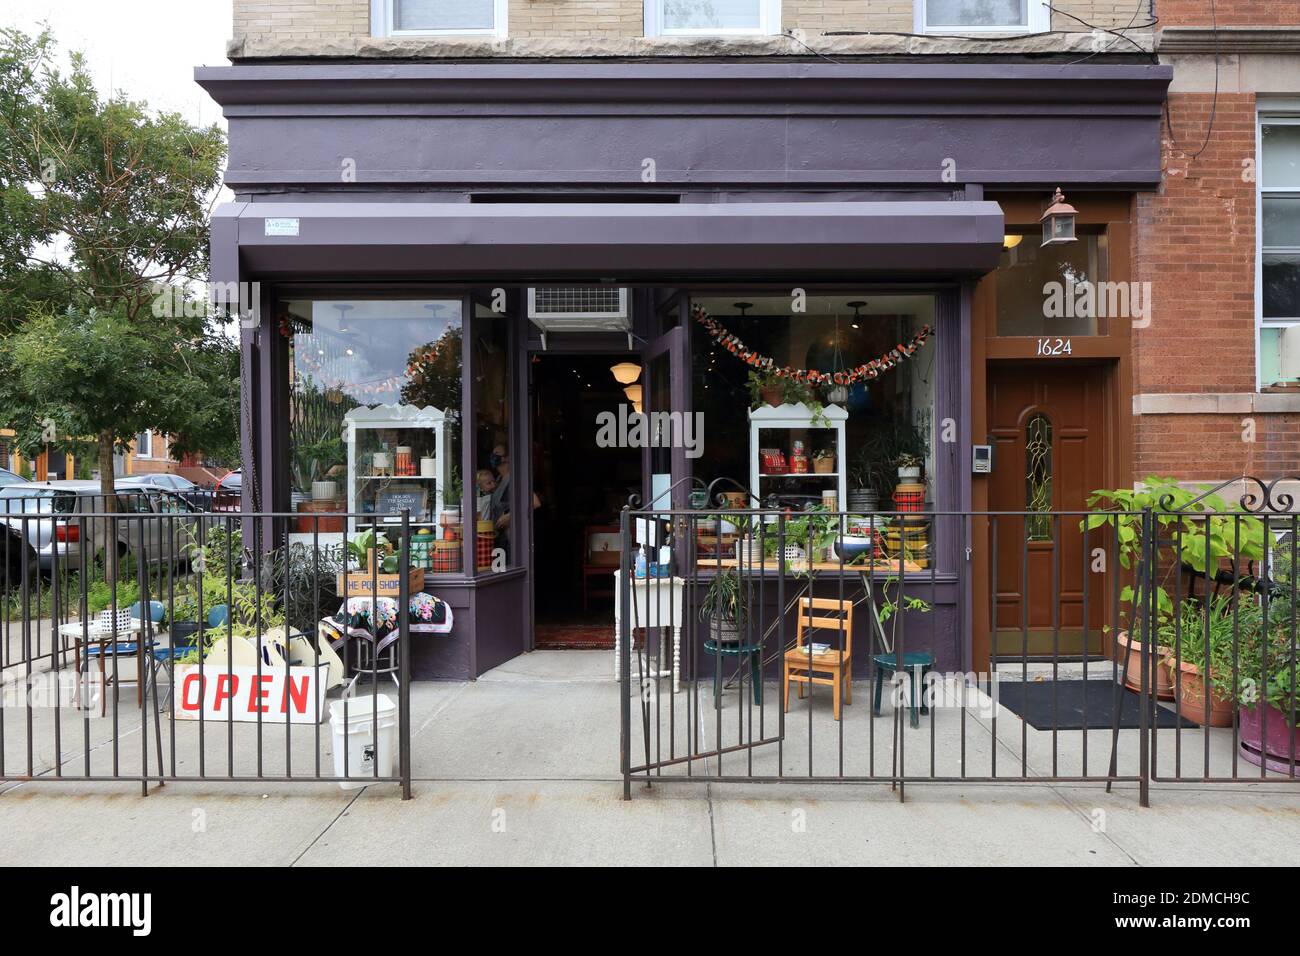 Windsor Place Antiques, 1624 10th Ave, Brooklyn, NY. exterior storefront of an antique shop in the Windsor Terrace neighborhood. Stock Photo